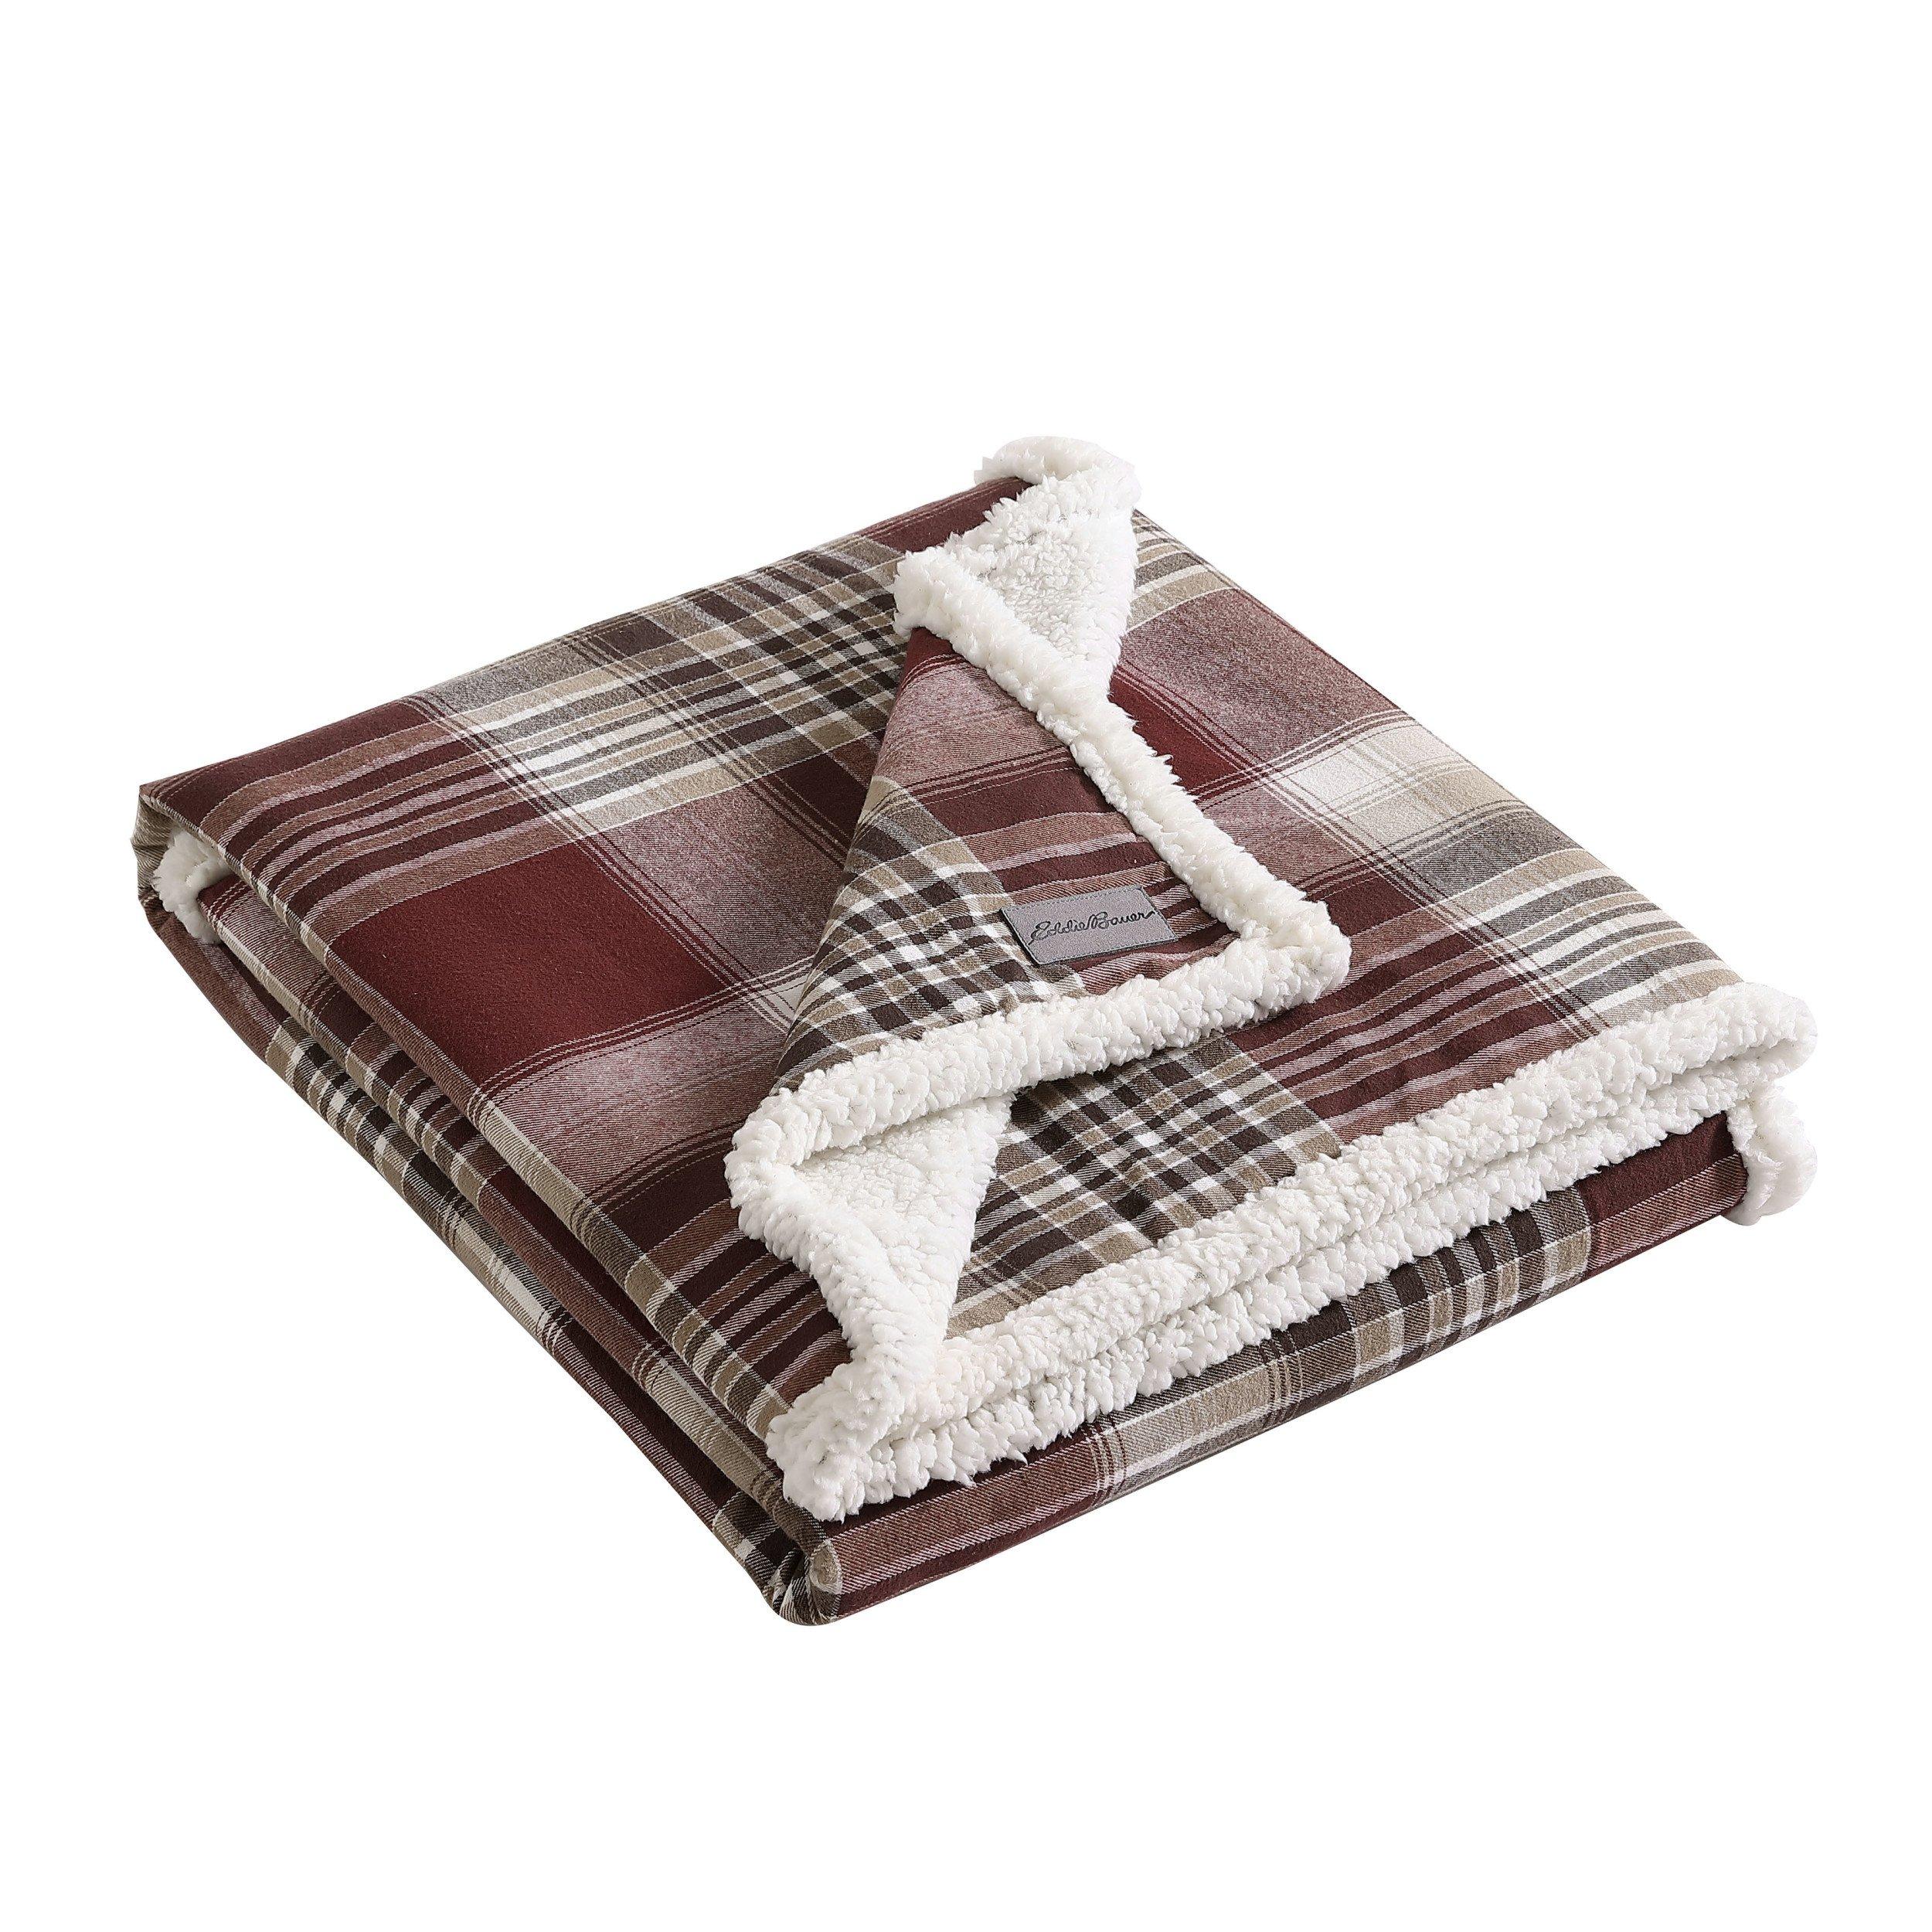 Photos - Other interior and decor Eddie Bauer Twin Lakes Flannel Reversible Throw 